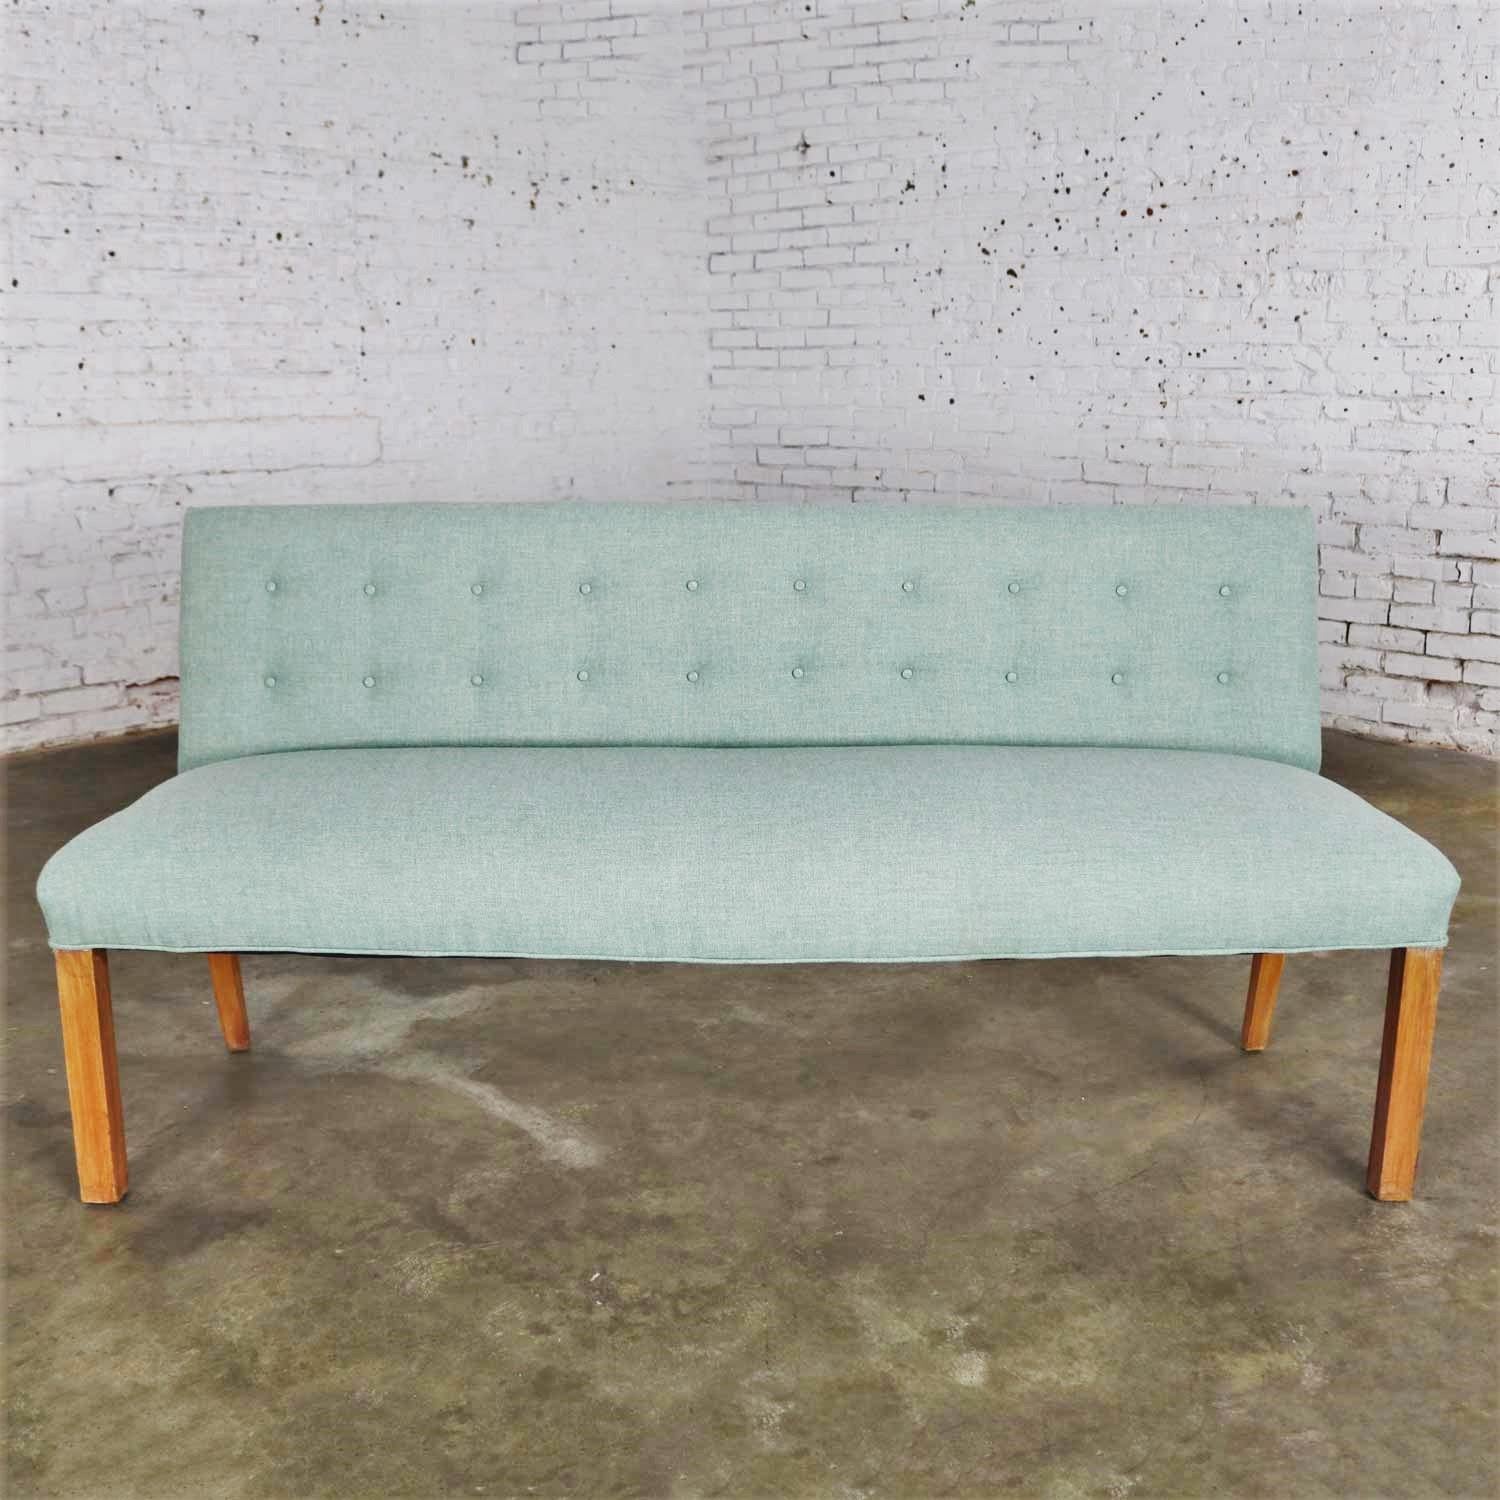 Handsome Mid-Century Modern armless bench with a back and button details done in the style of Tommi Parzinger. It is in wonderful vintage condition and recently recovered in new yet vintage fabric. The legs have been touched up but not refinished as